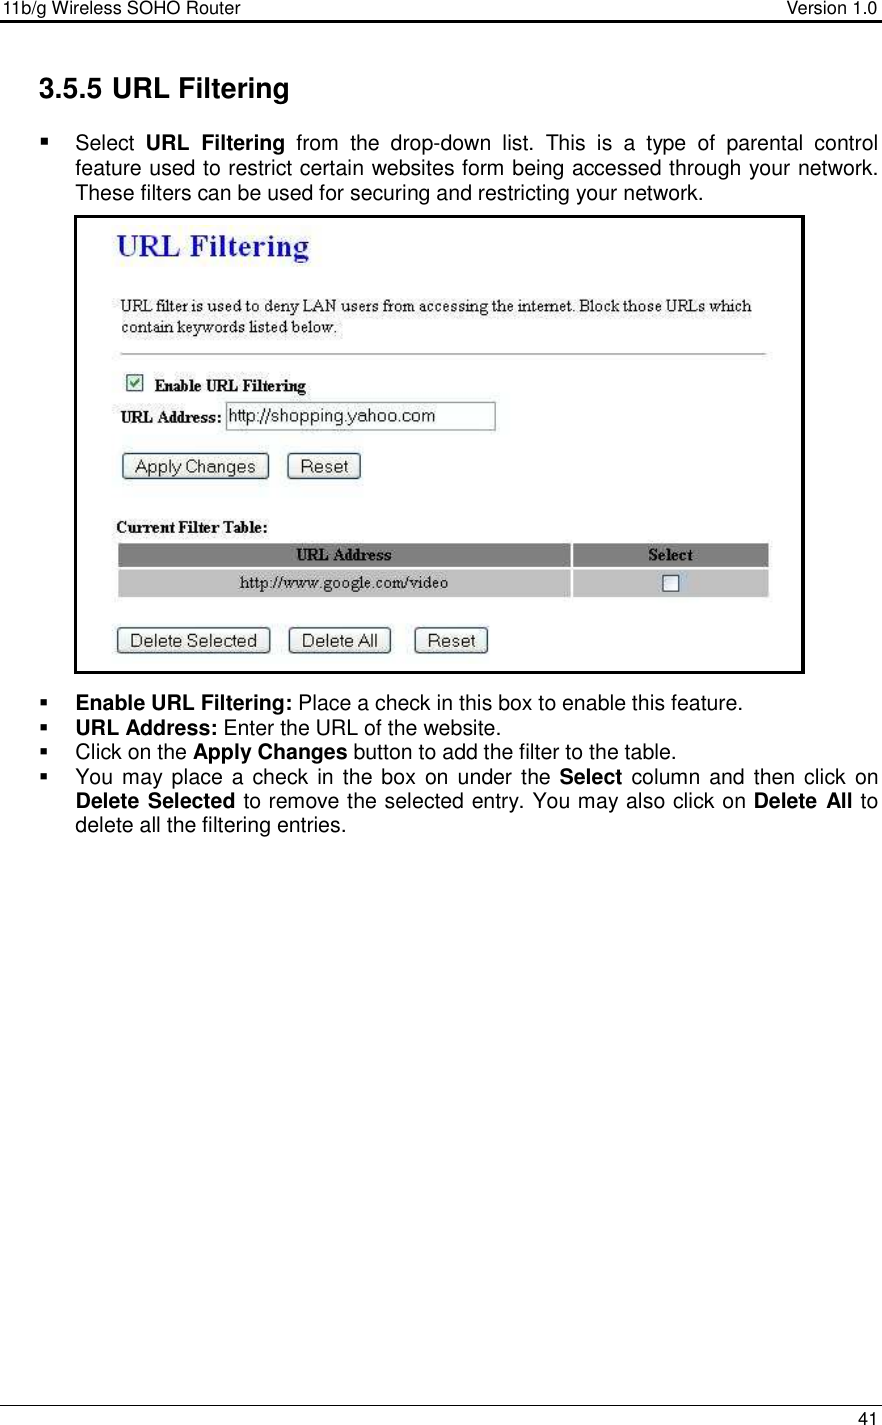 11b/g Wireless SOHO Router                                     Version 1.0    41  3.5.5 URL Filtering  Select  URL  Filtering  from  the  drop-down  list.  This  is  a  type  of  parental  control feature used to restrict certain websites form being accessed through your network. These filters can be used for securing and restricting your network.                      Enable URL Filtering: Place a check in this box to enable this feature.   URL Address: Enter the URL of the website.    Click on the Apply Changes button to add the filter to the table.    You may place a check in the box on under  the Select  column and then click  on Delete Selected to remove the selected entry. You may also click on Delete All to delete all the filtering entries.   